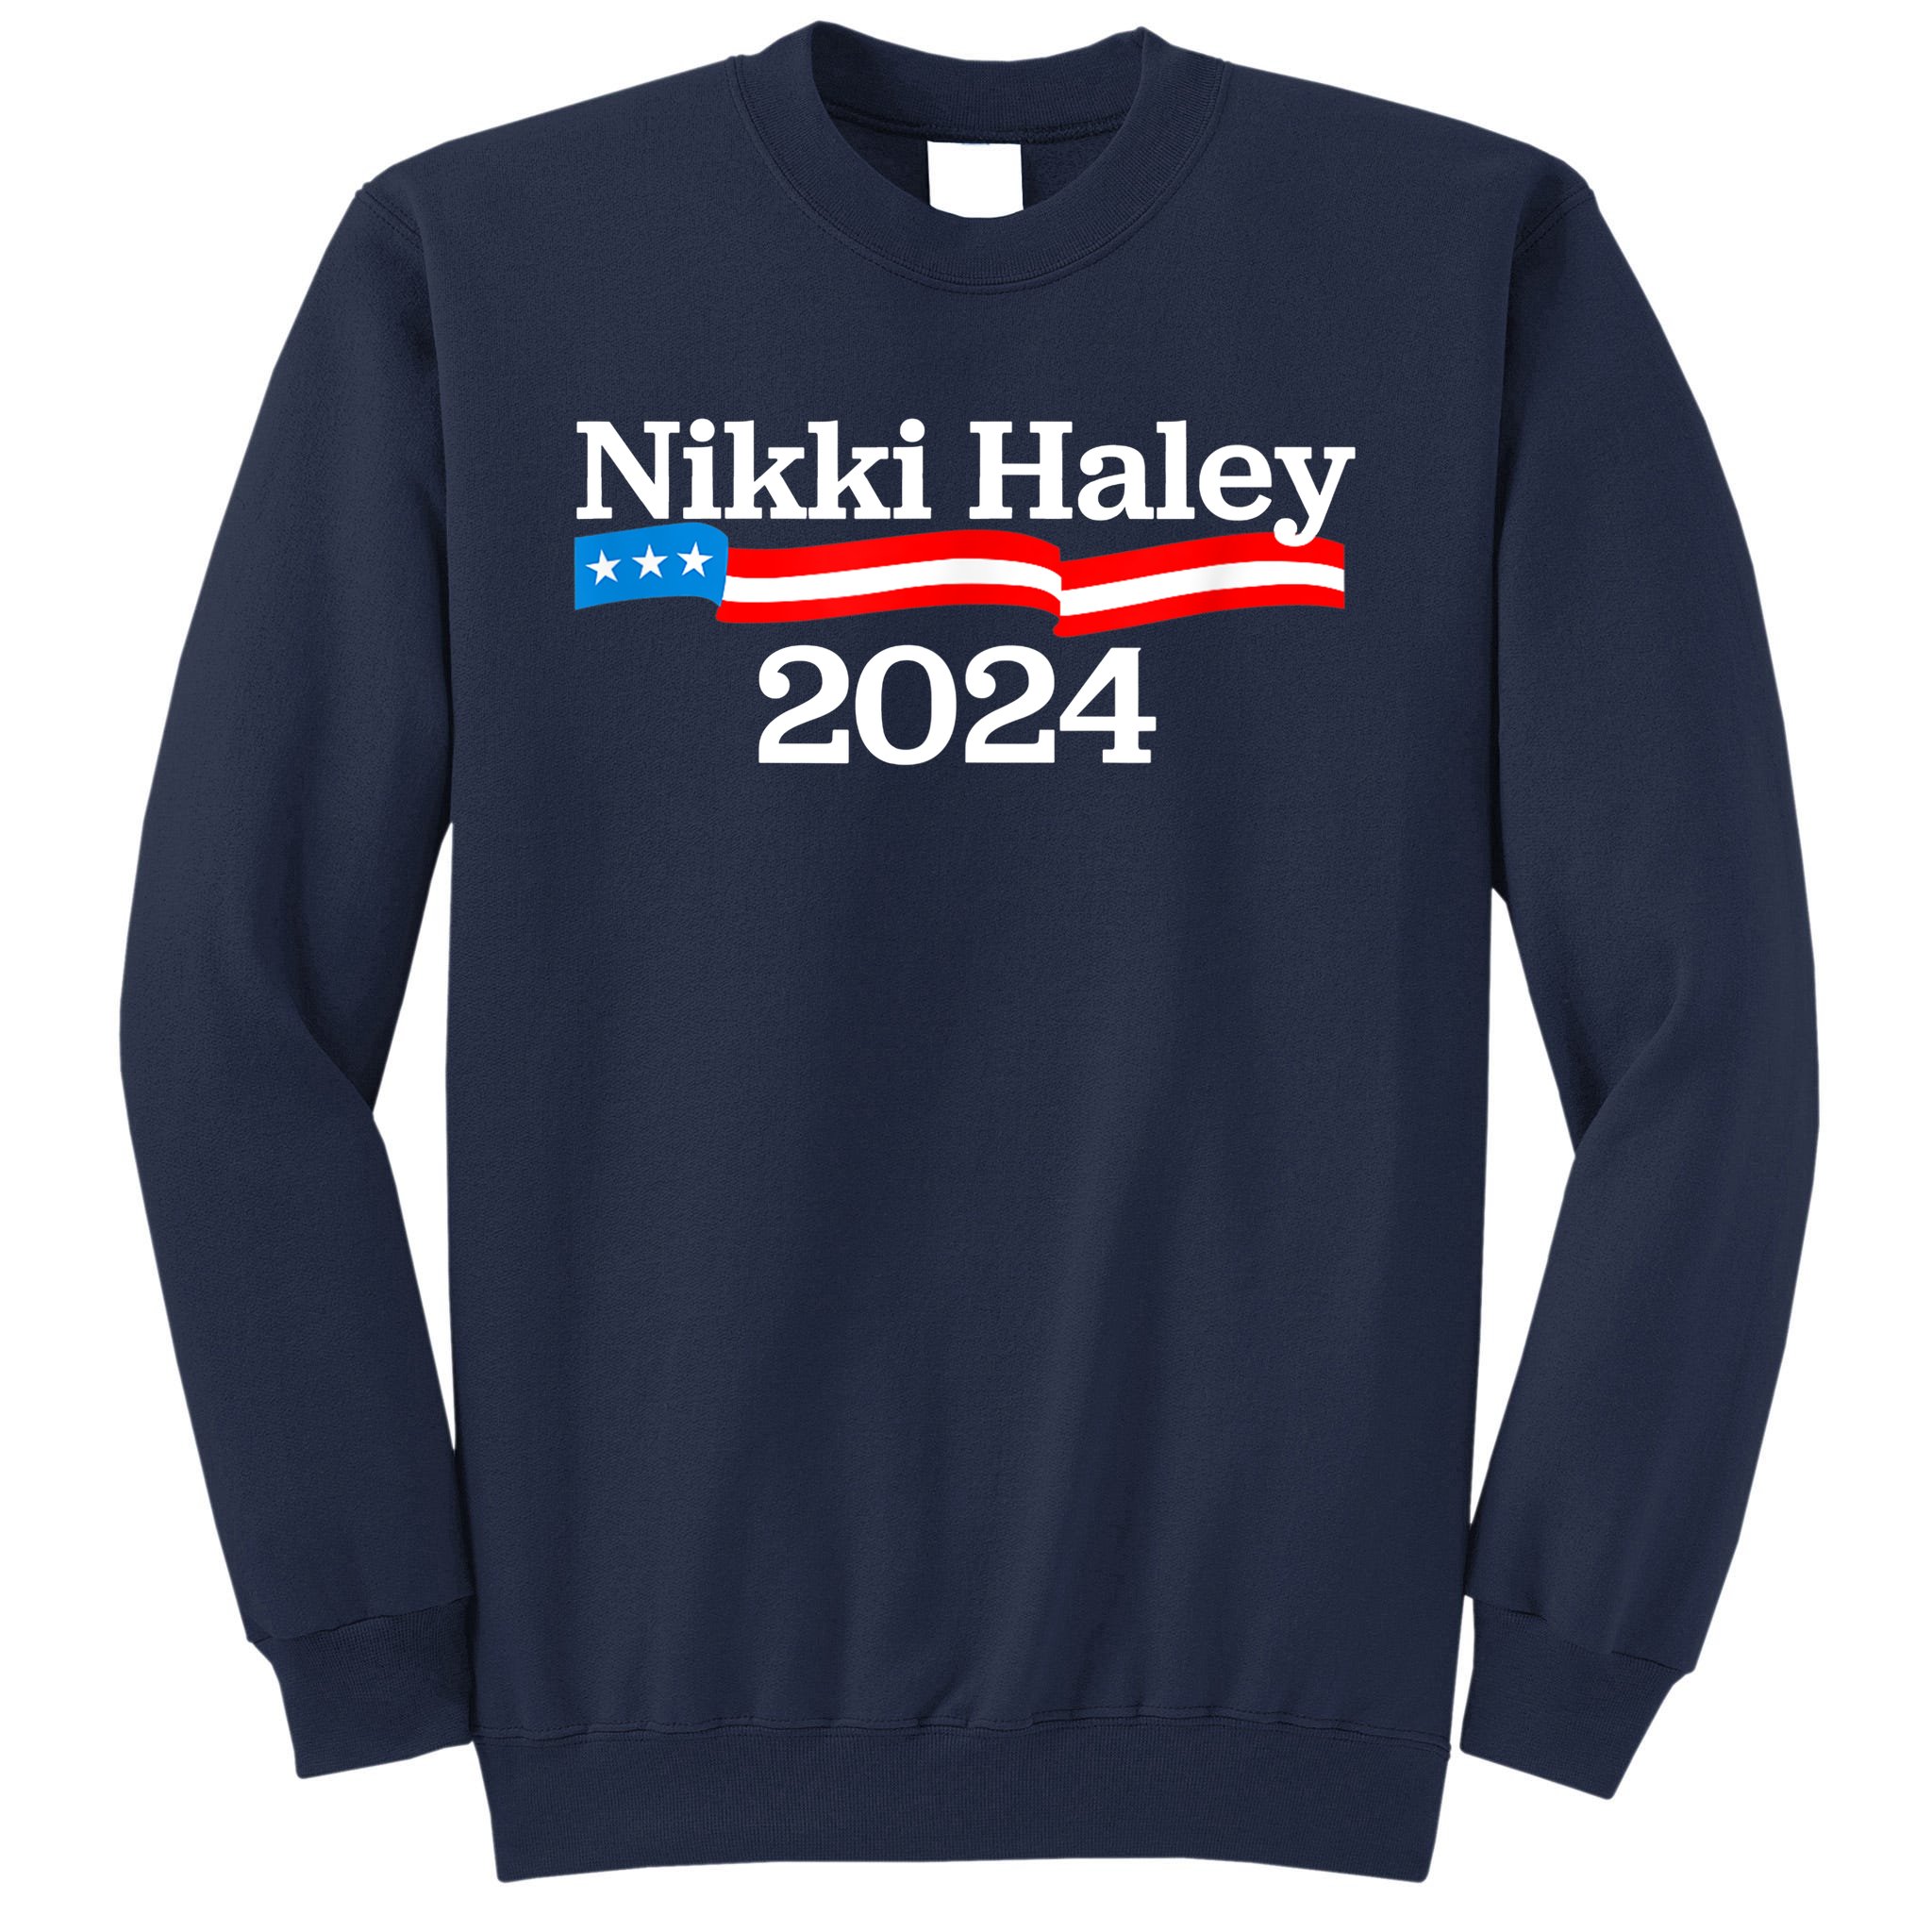 Nikki Haley For President 2024 Election Campaign Tall Sweatshirt